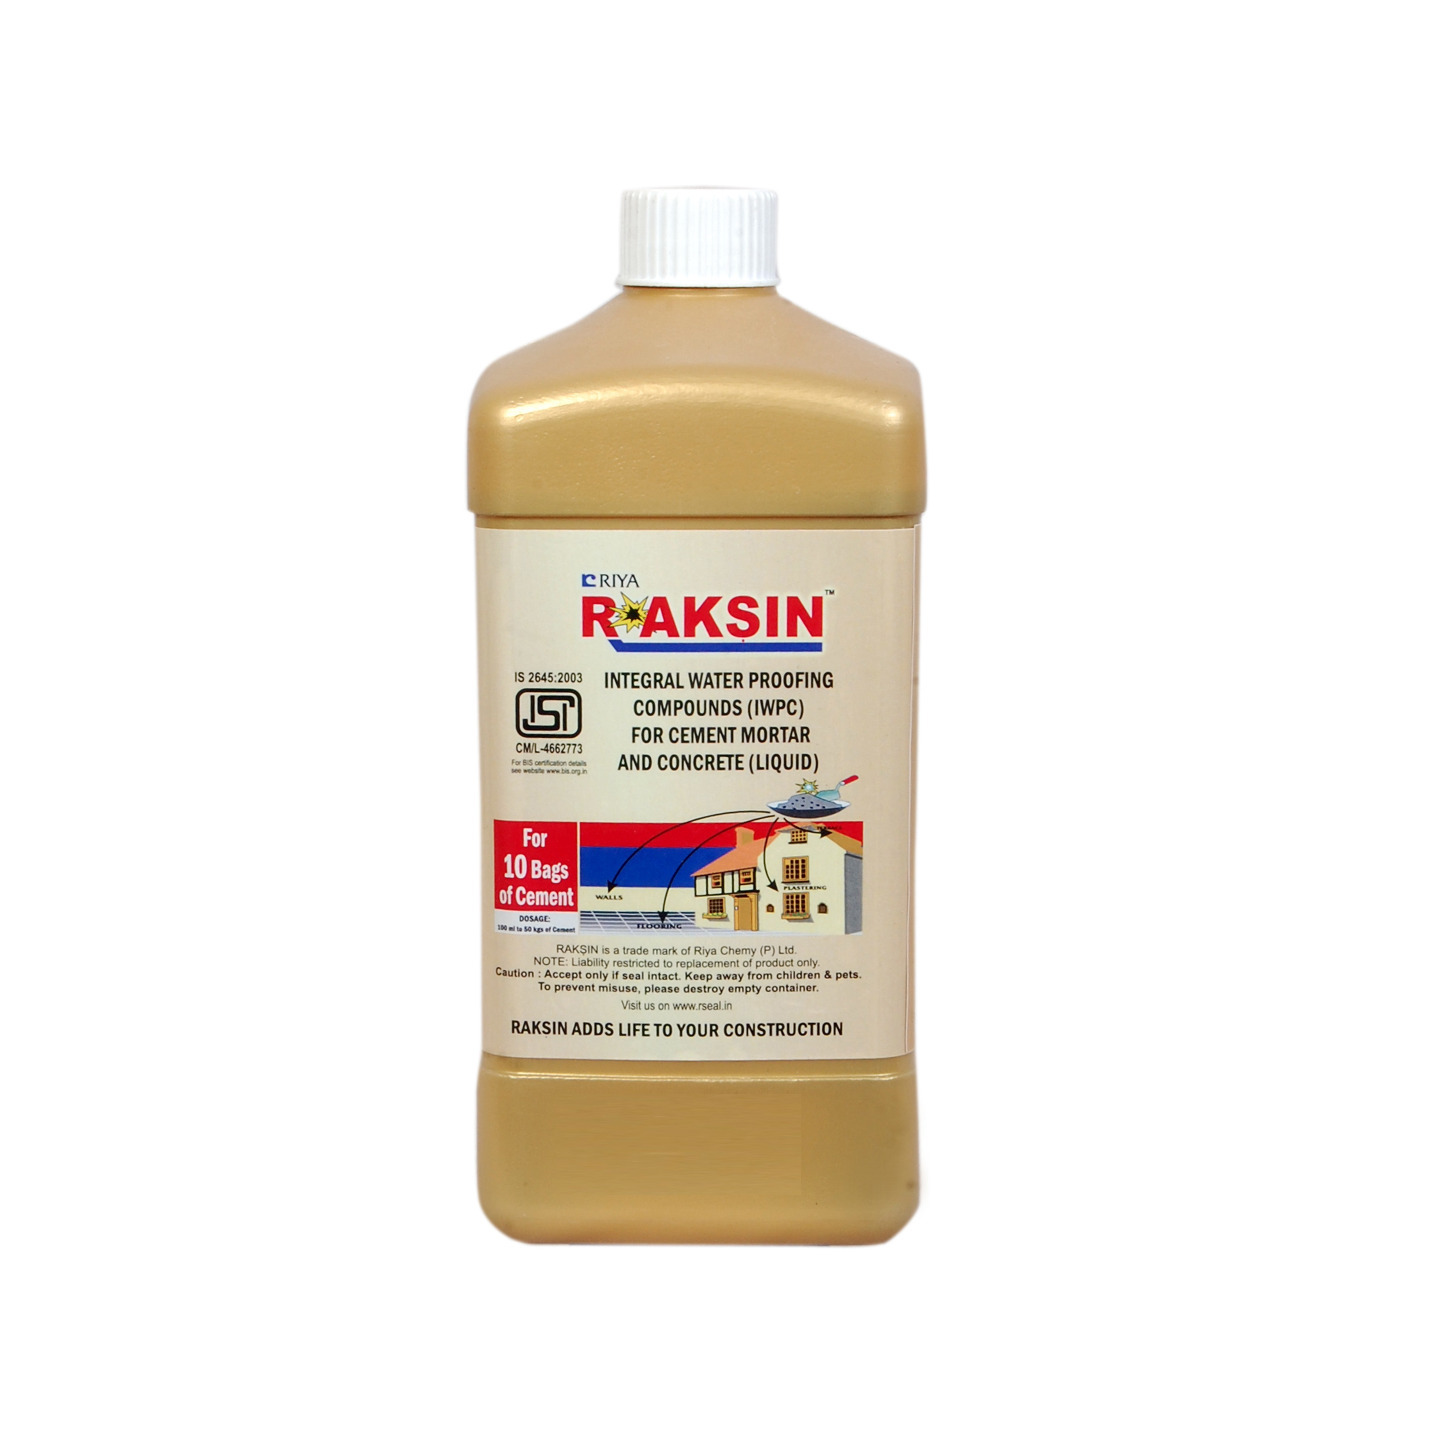 RAKSIN Water Proofing Compound Liquid ISI Quality Certified - 1000 ml